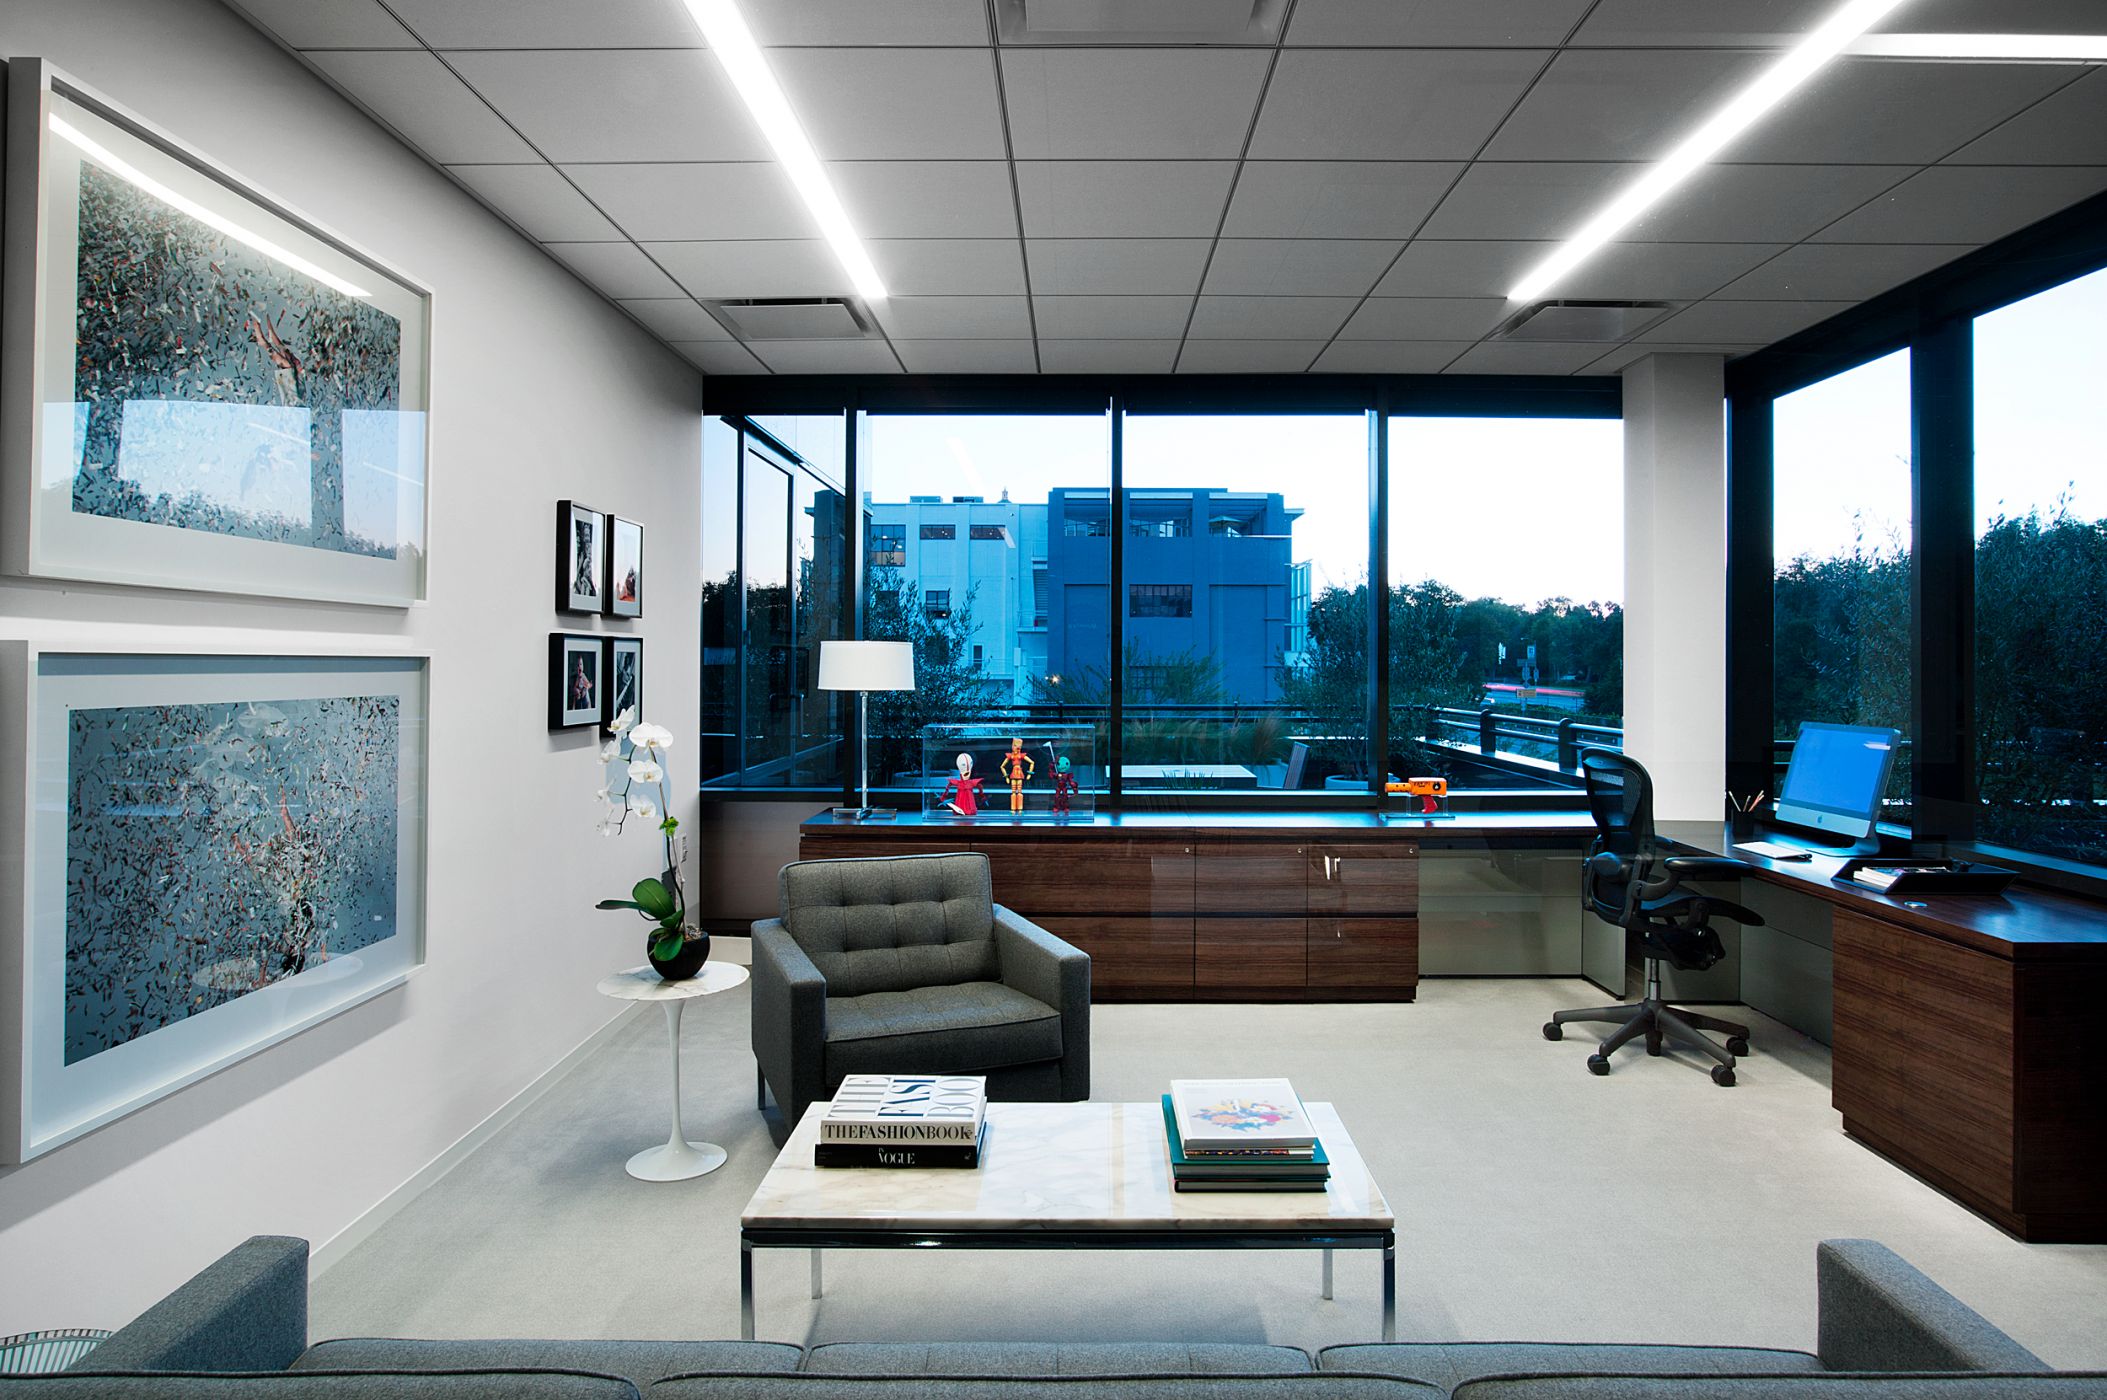 United Talent Agency's private offices feature sleek MILLENNIA desking in Quarter Cut Limba veneer.